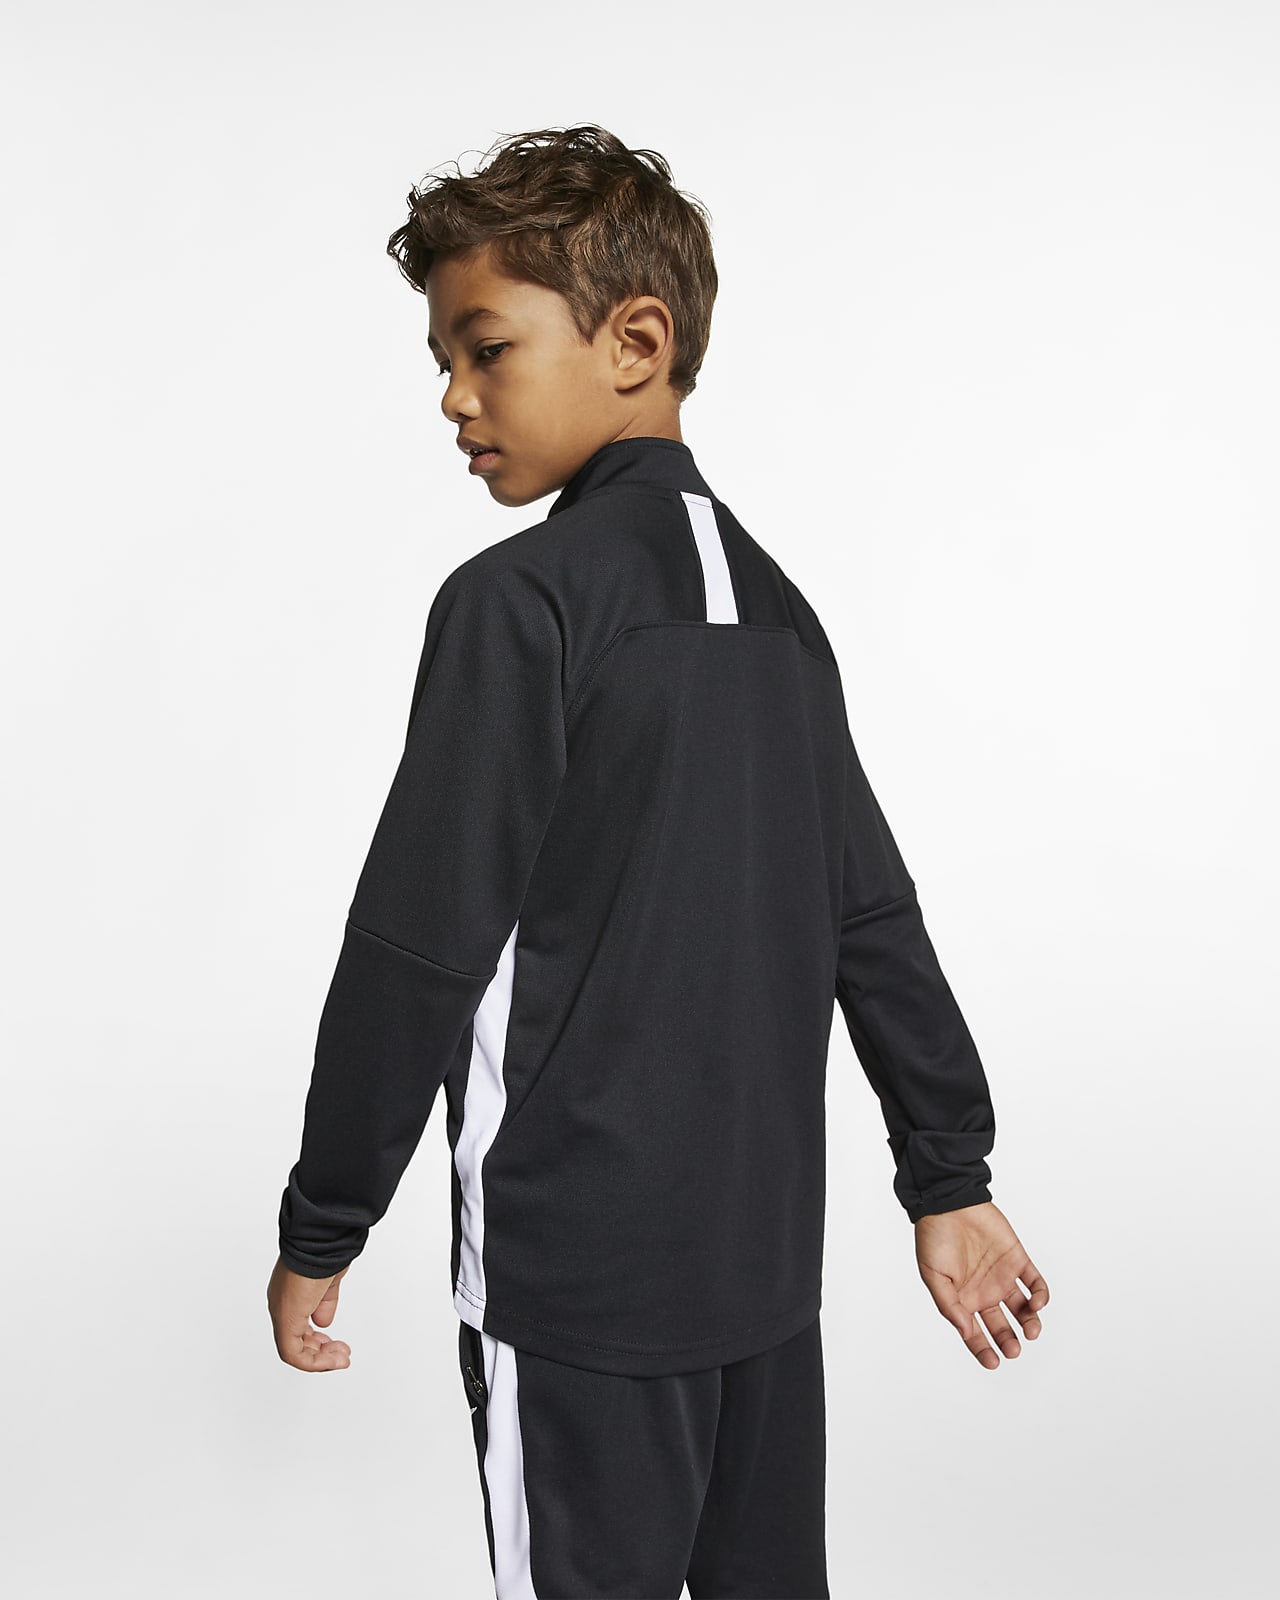 exclusive nike tracksuit